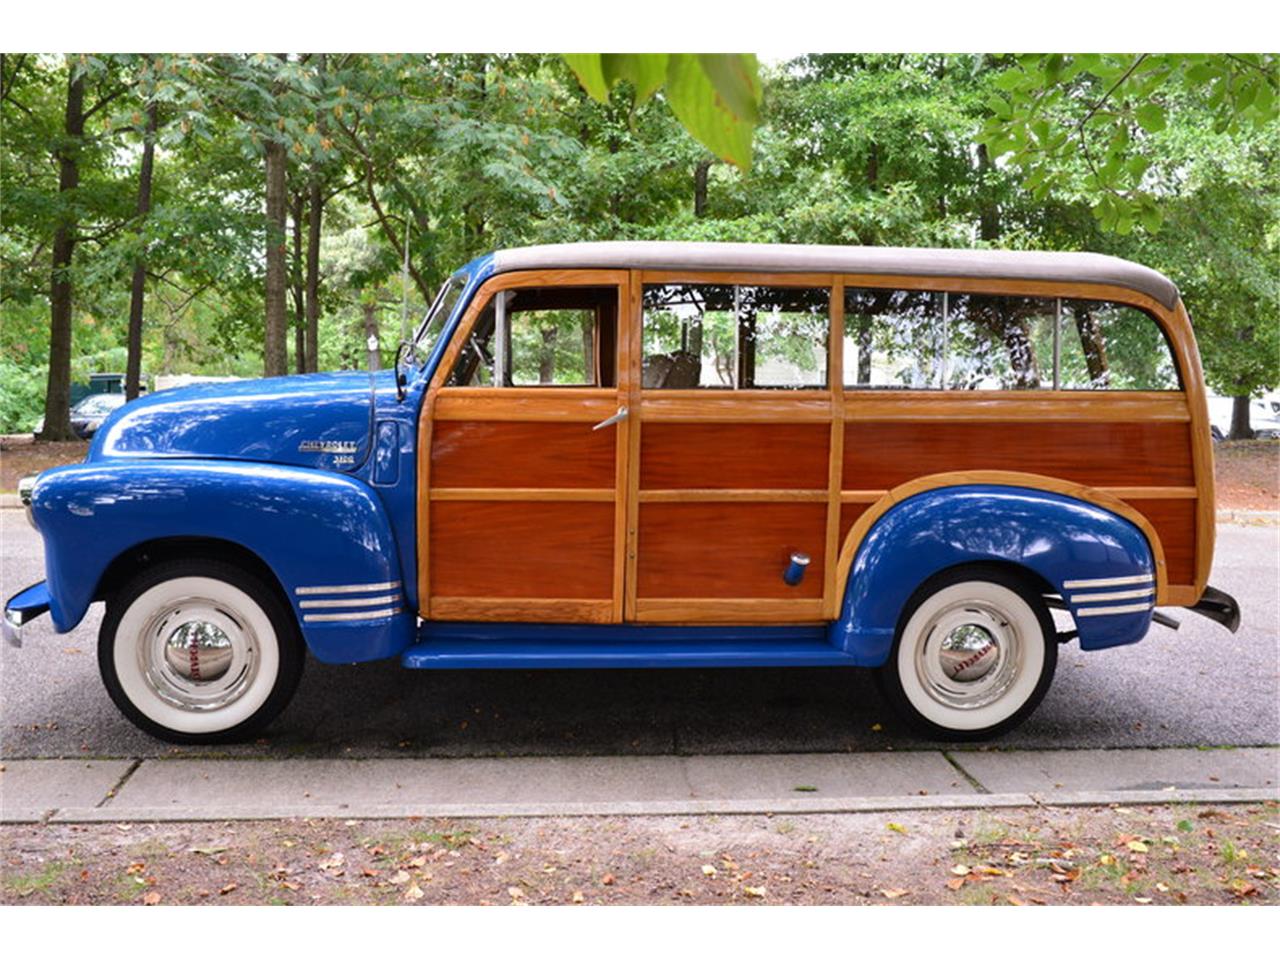 1950 Chevrolet Highlander Woodie Suburban for Sale | ClassicCars.com